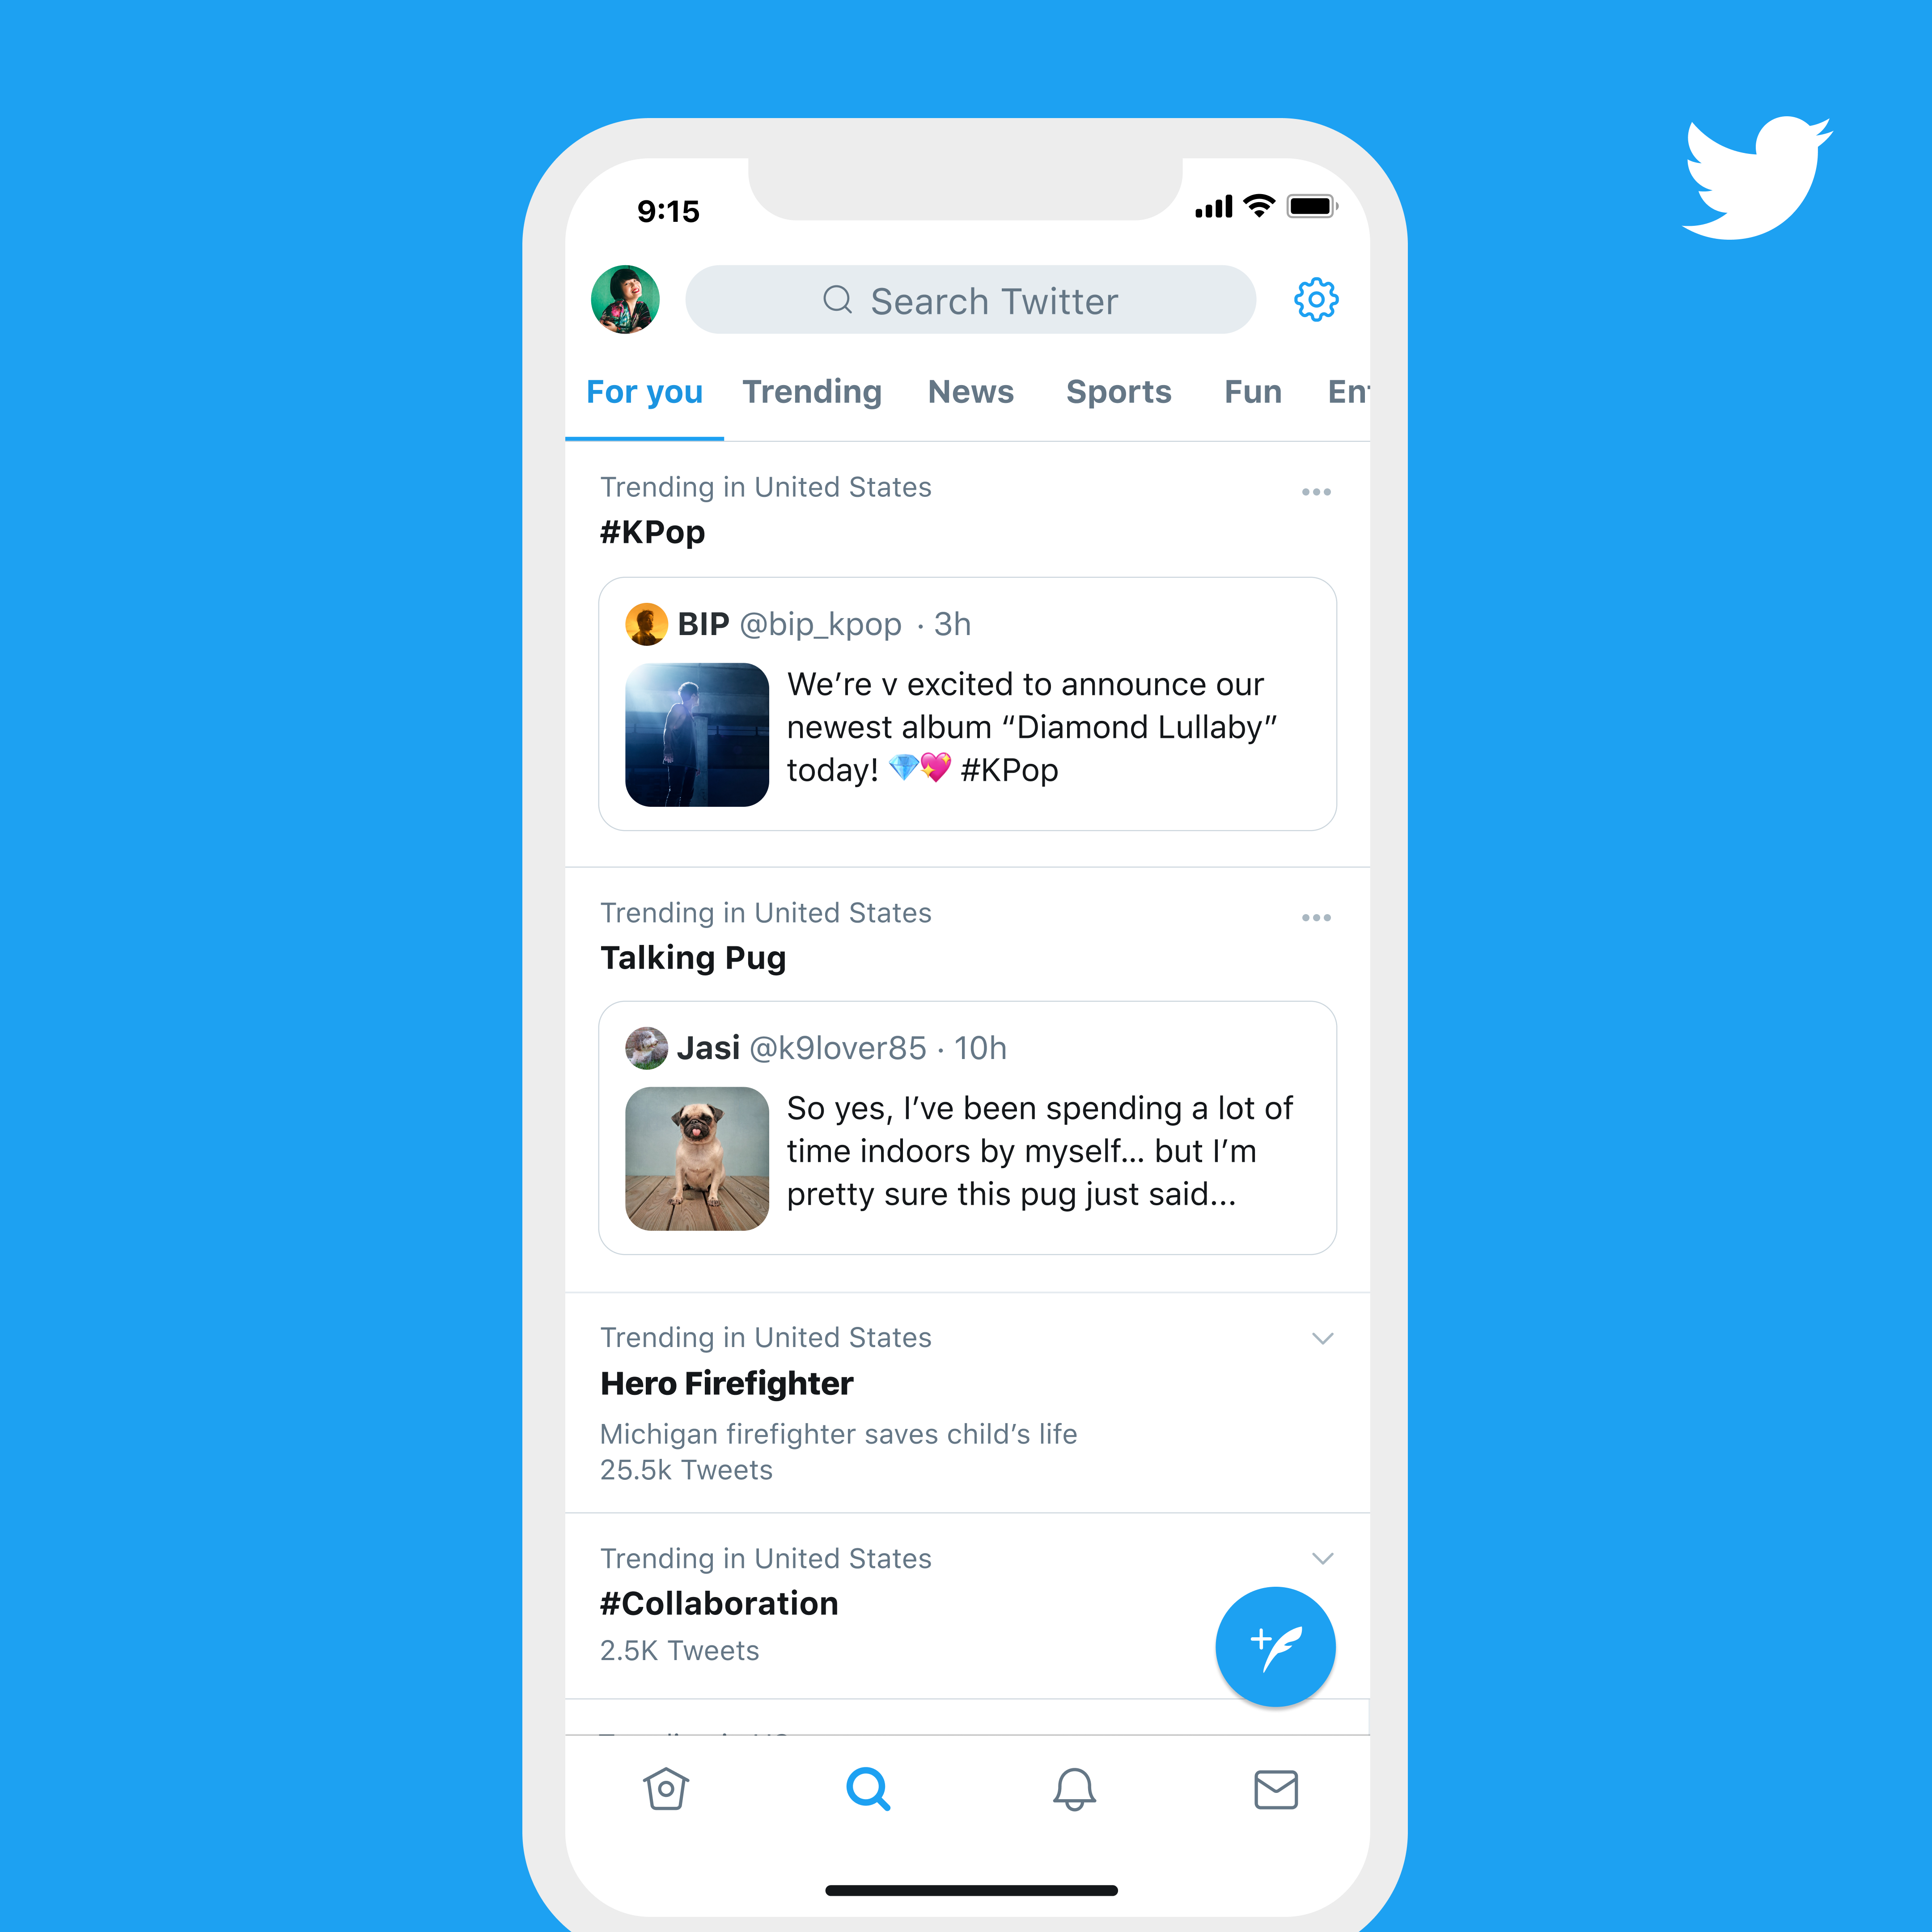 Twitter Is Adding Context To Trending Topics By Answering 'Why Is This Trending?'